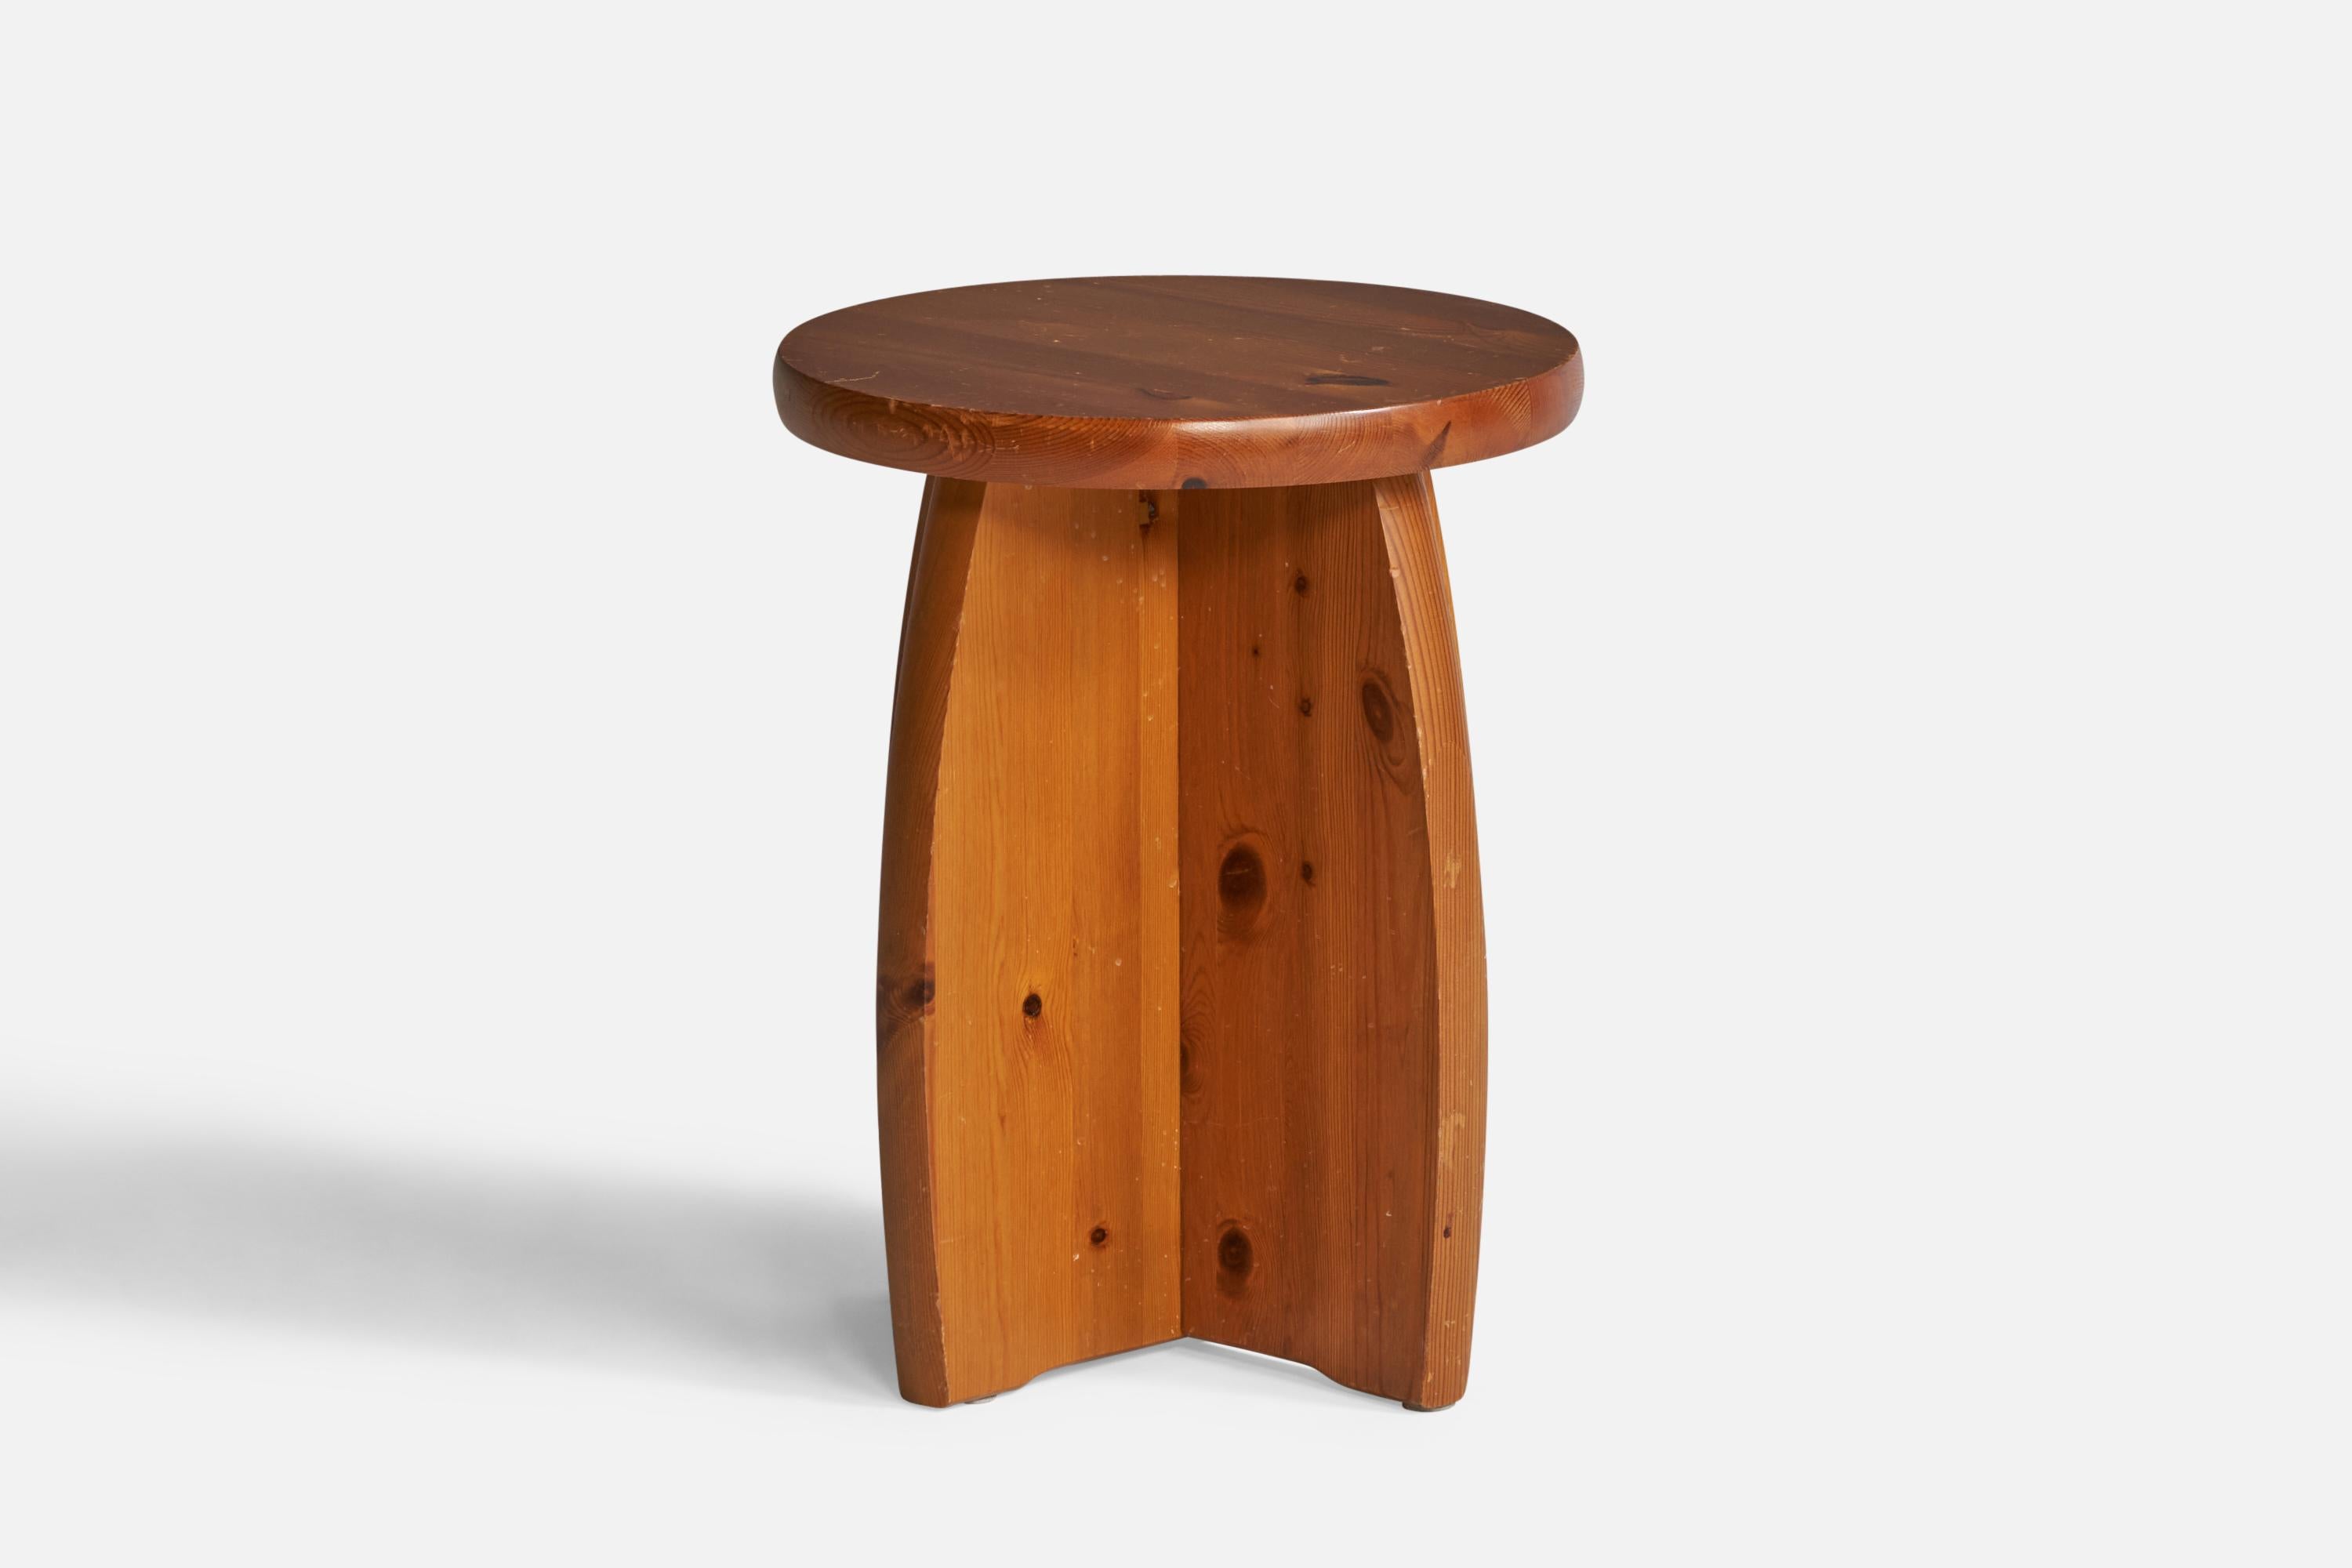 A pine stool designed and produced in Sweden, c. 1970s.

Seat height: 17”